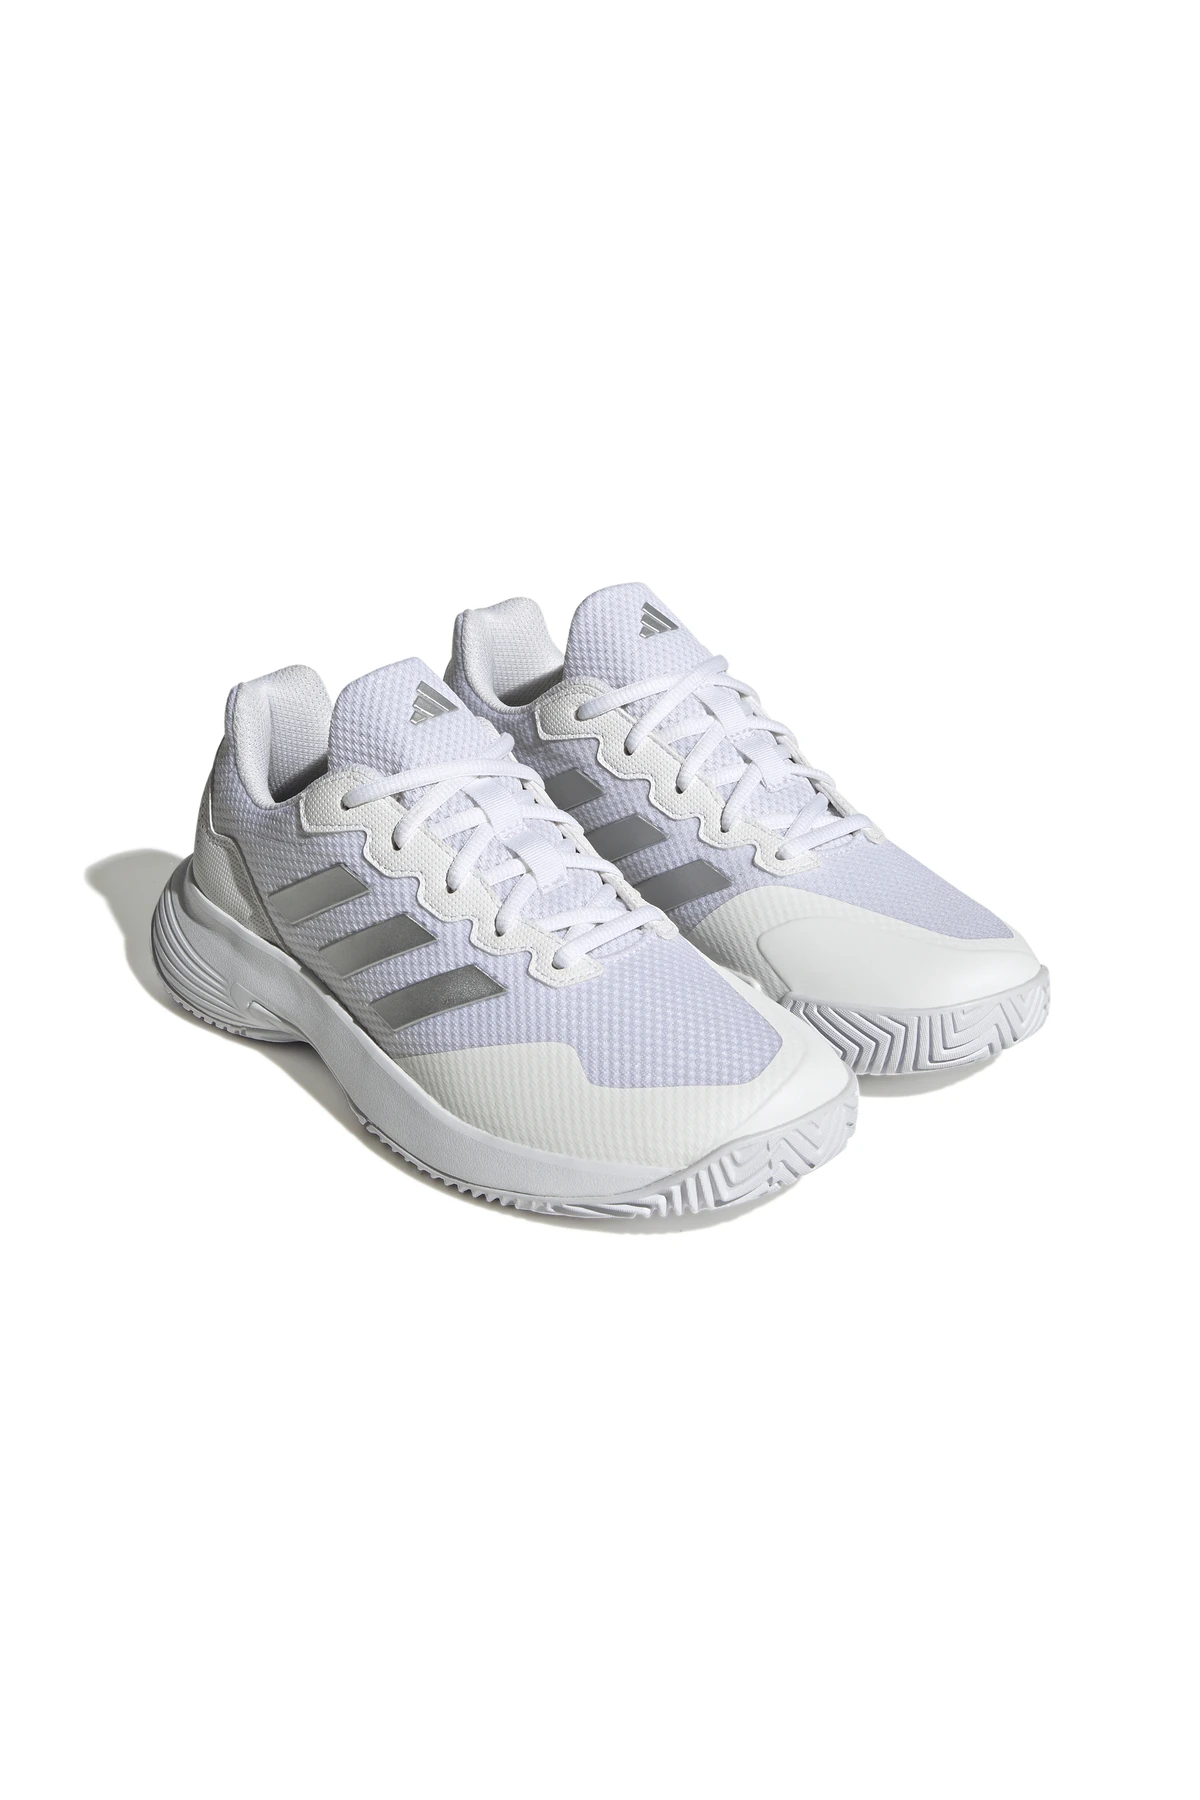 The Allure of Adidas Women’s Tennis Shoes插图1